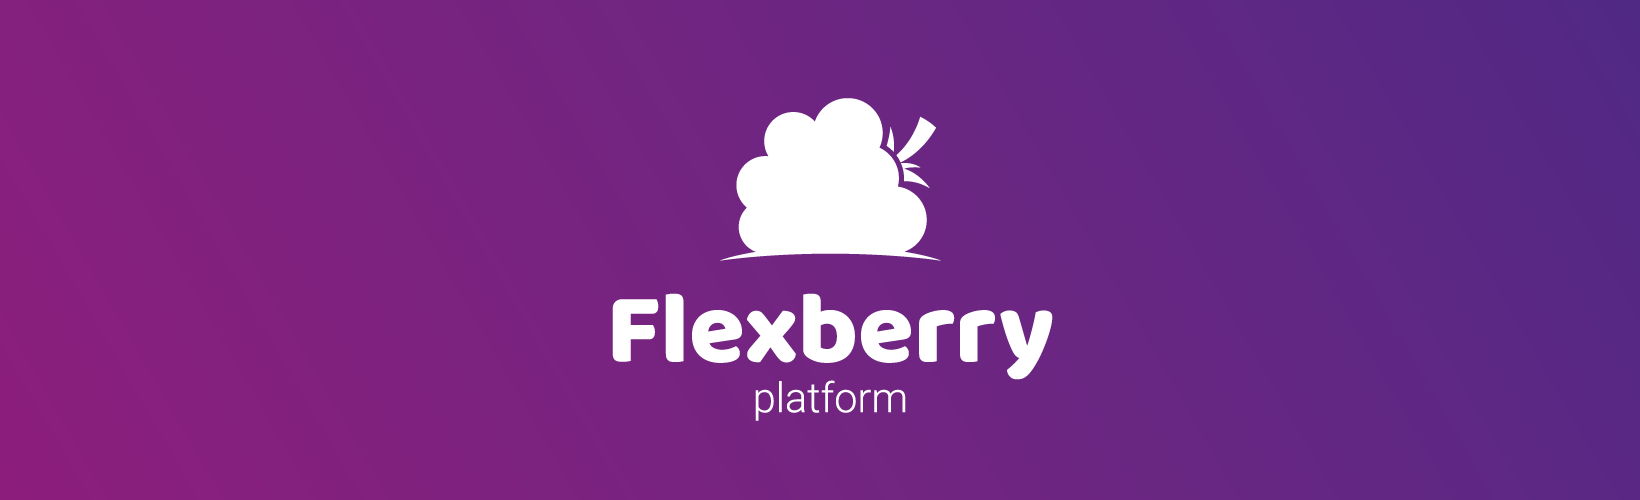 Flexberry - Business analyst AI assistant